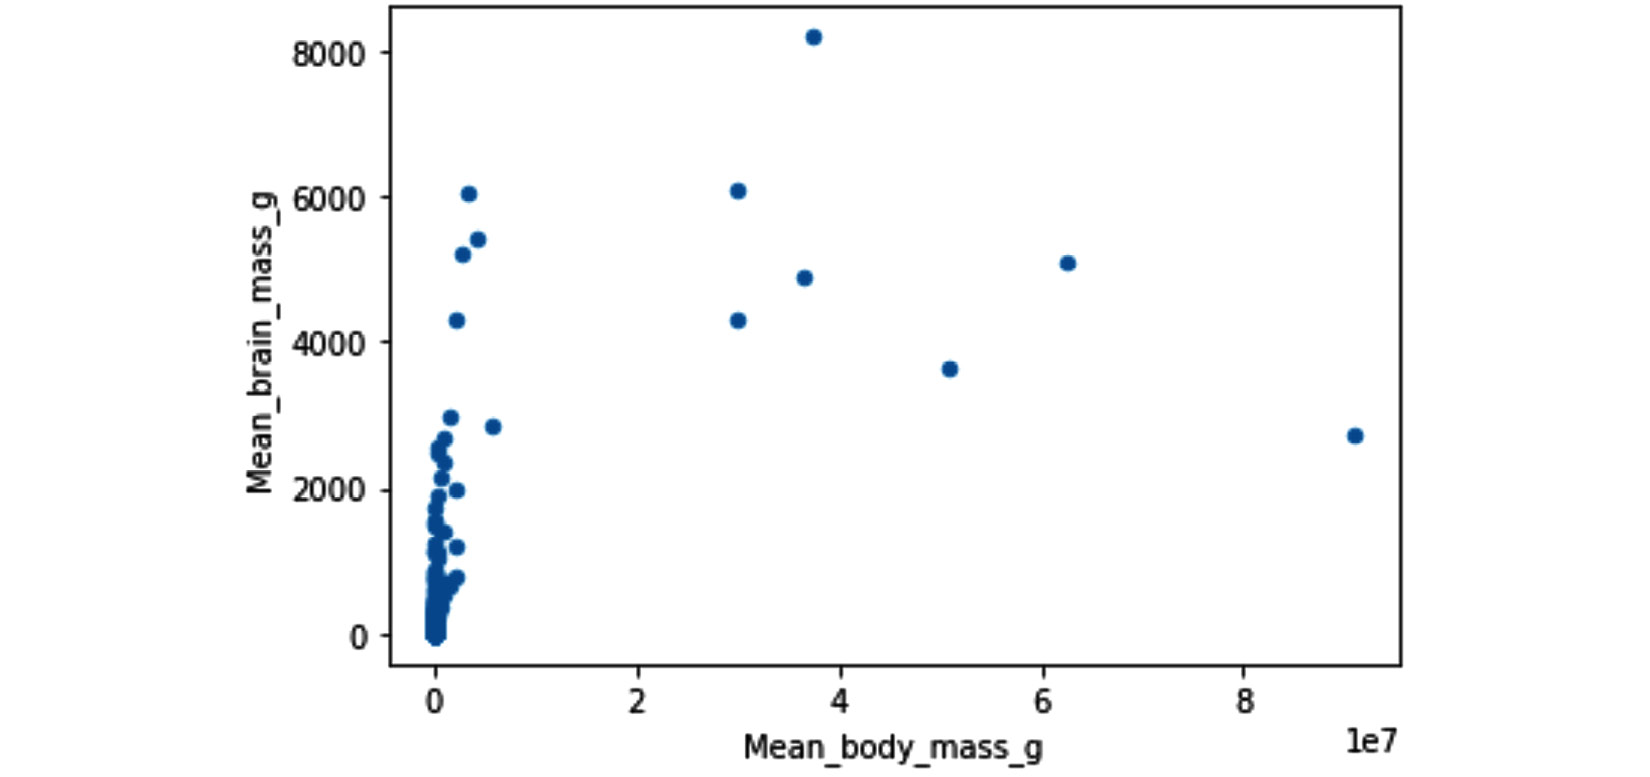 Figure 14.28 – Scatter plot of Mean_body_mass_g and Mean_brain_mass_g
